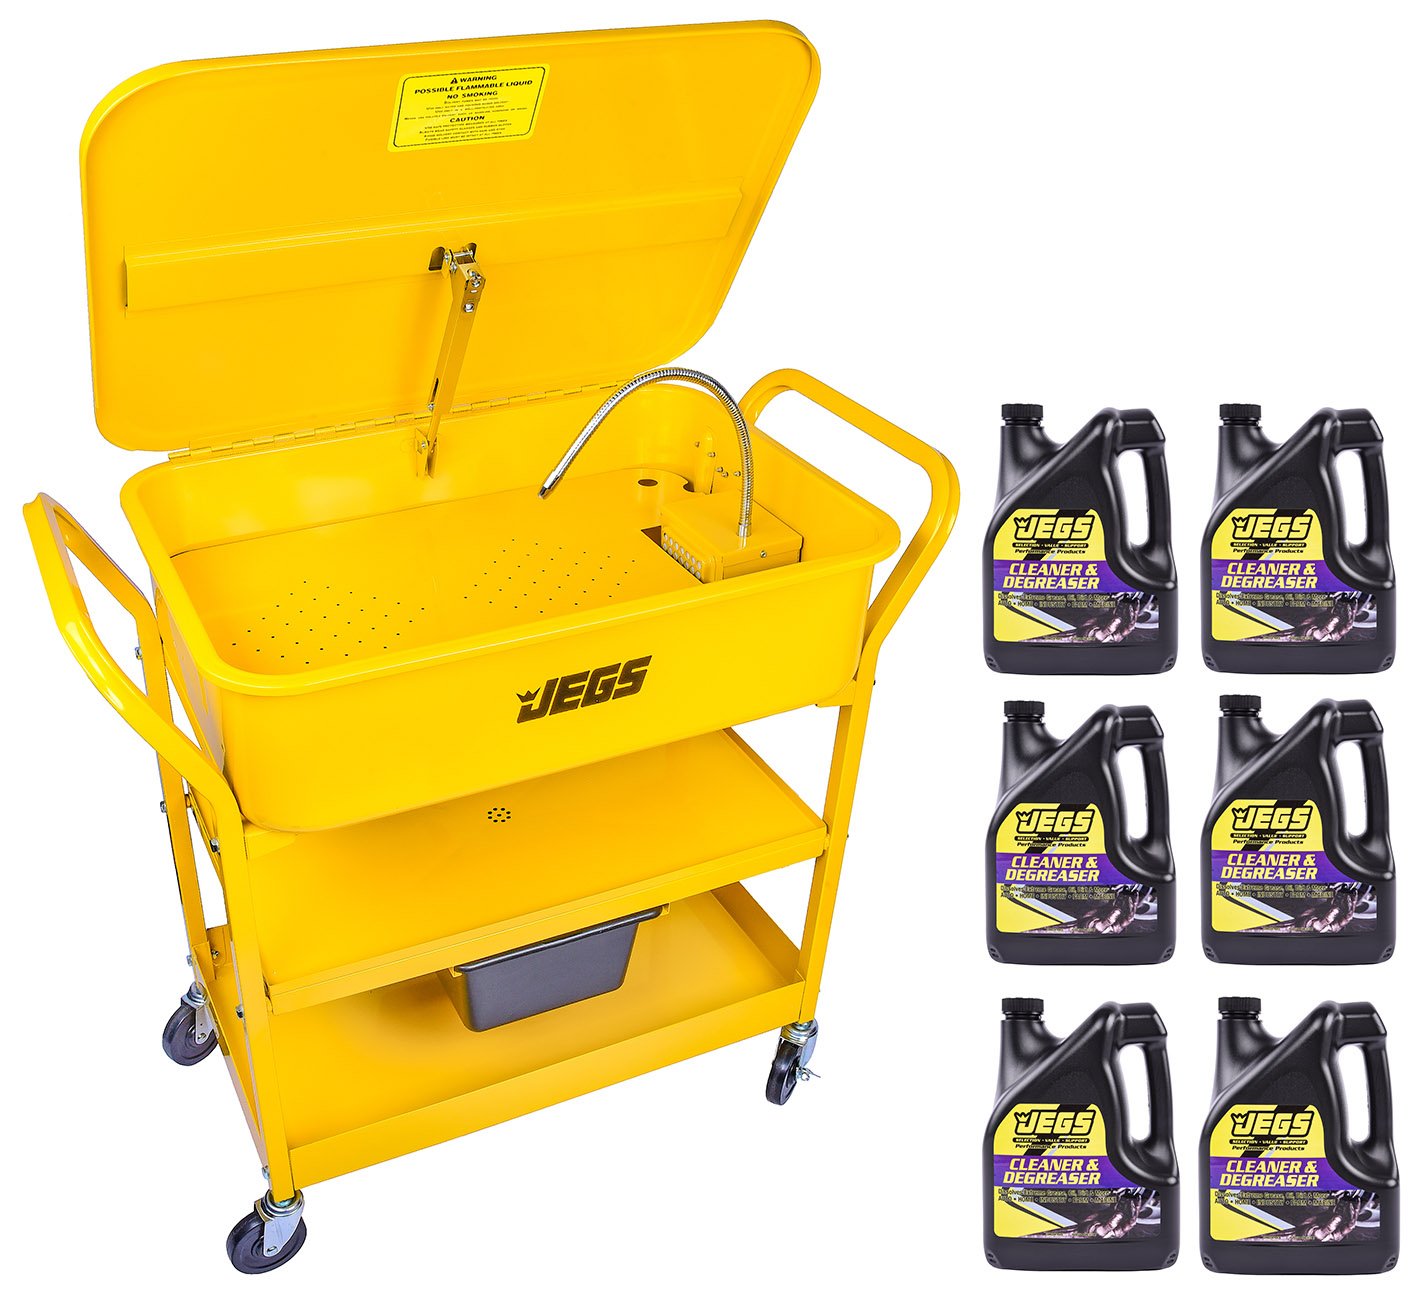 20-Gallon Portable Parts Washer & Cleaning Fluid Kit